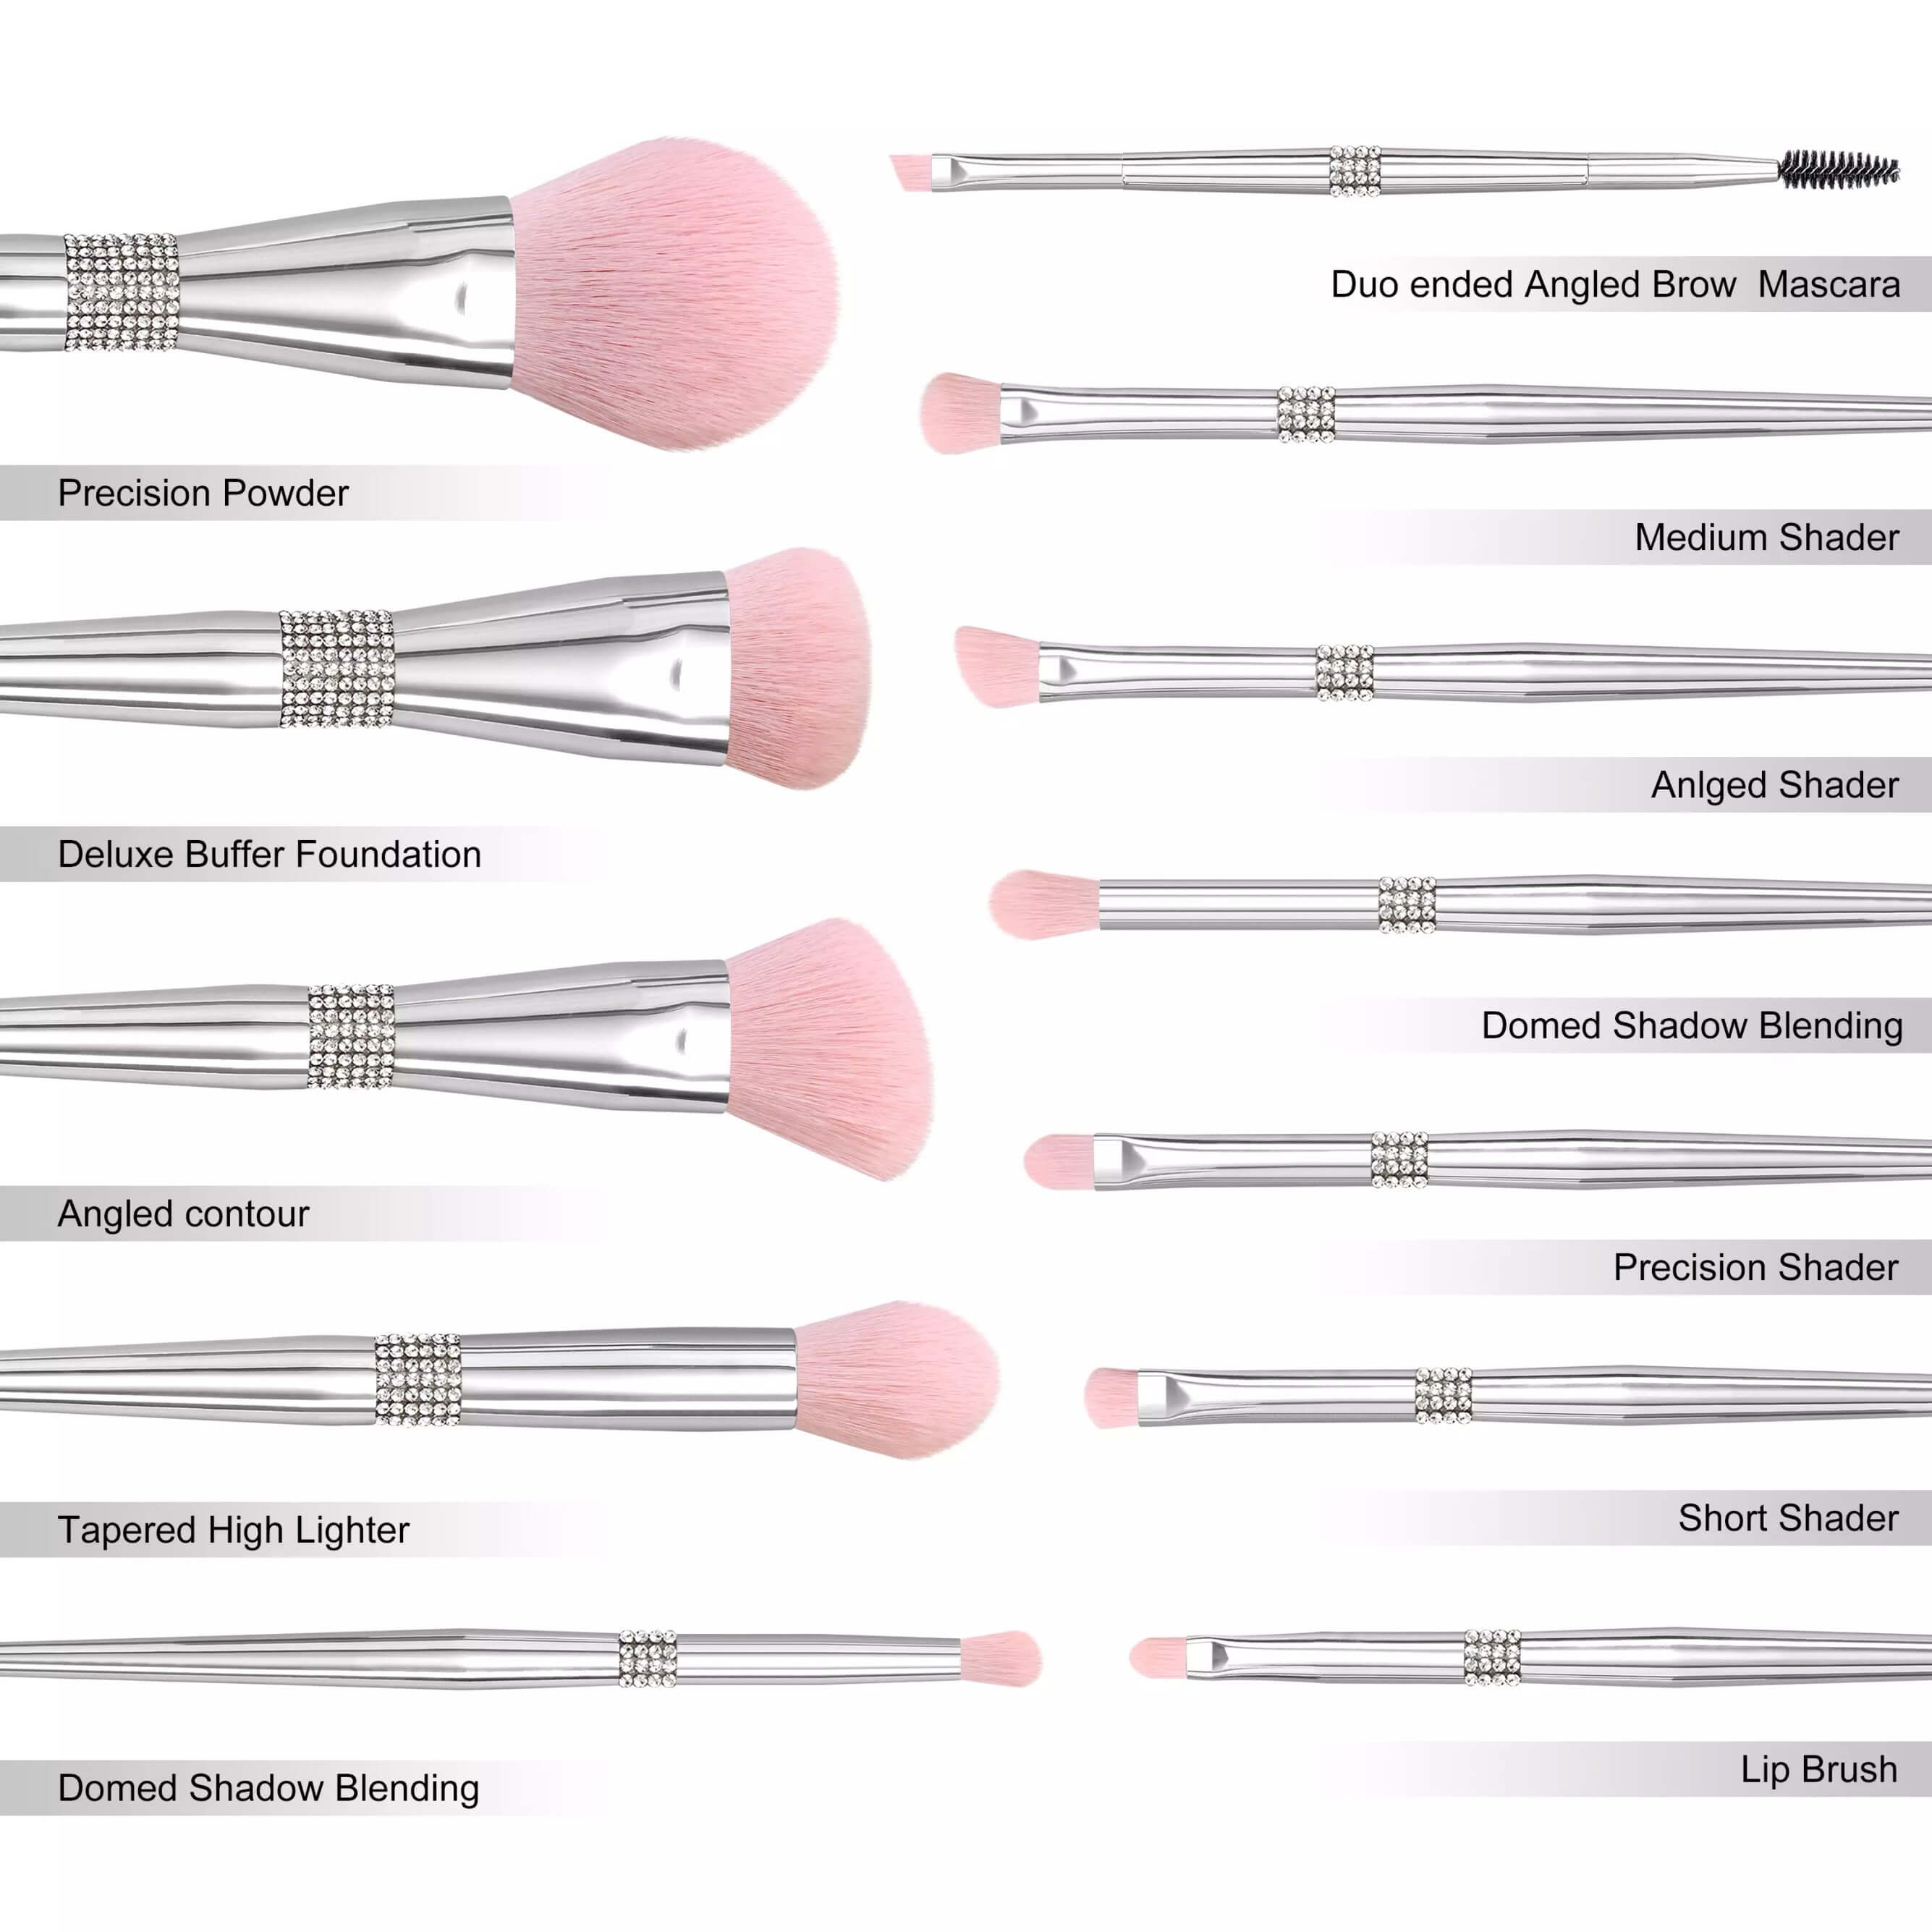 Description of Makeup Brushes included in this set